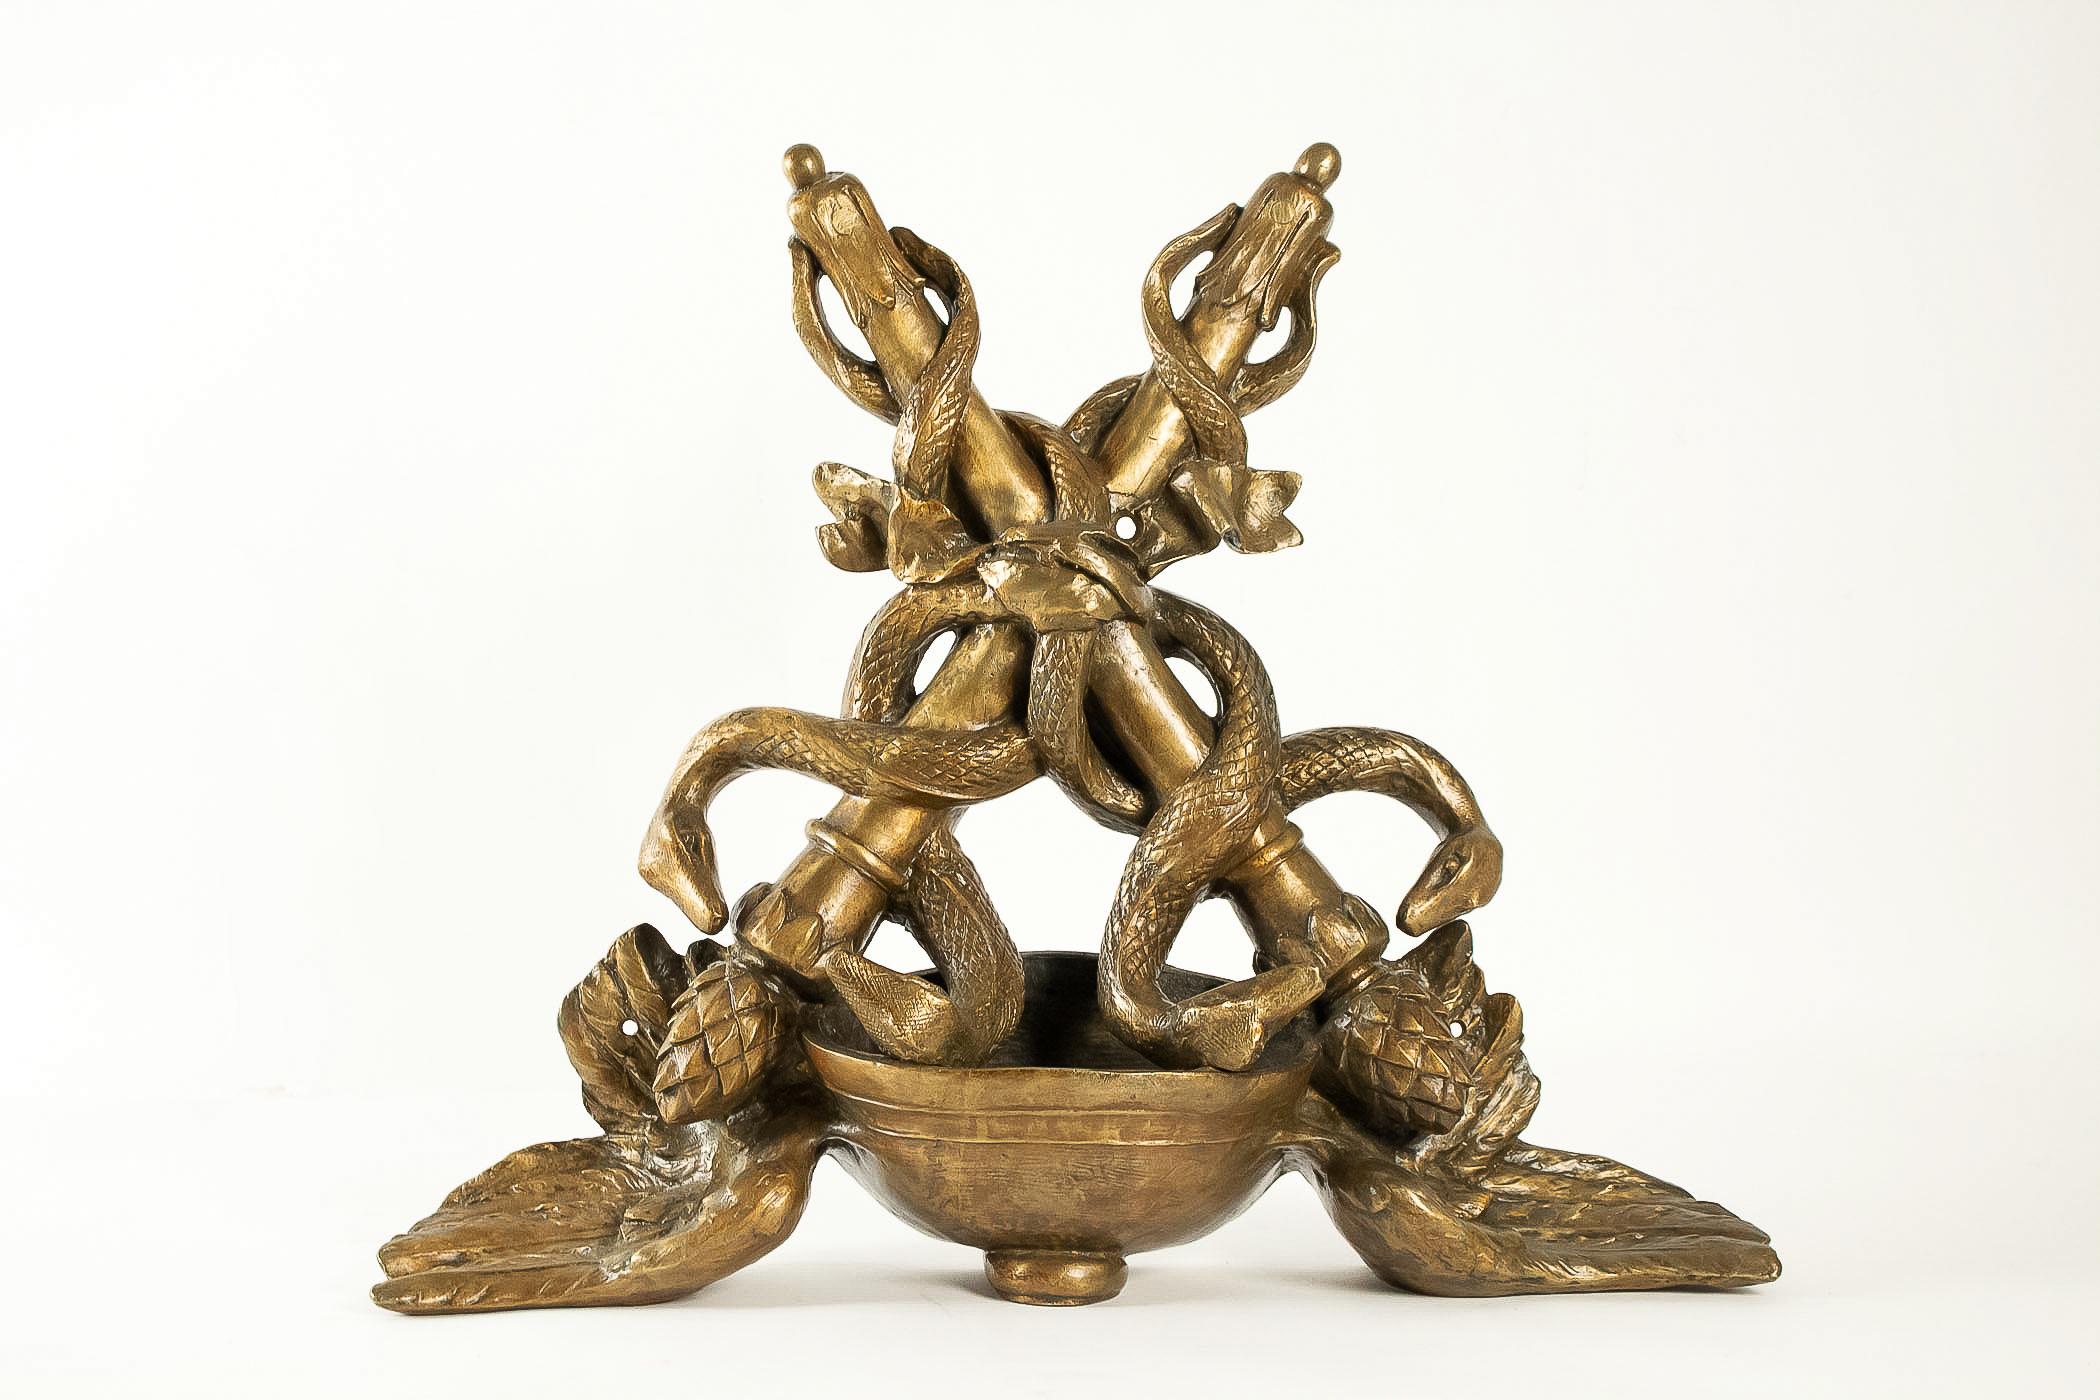 Much symbolism for this 19th century caduceus in gilt bronze finely chiseled, coming from an old pharmacy of the city of Chateau-Thierry, the town of Jean de La Fontaine (La Fontaine Fables), the famous French 17th century writer.

An atypical and